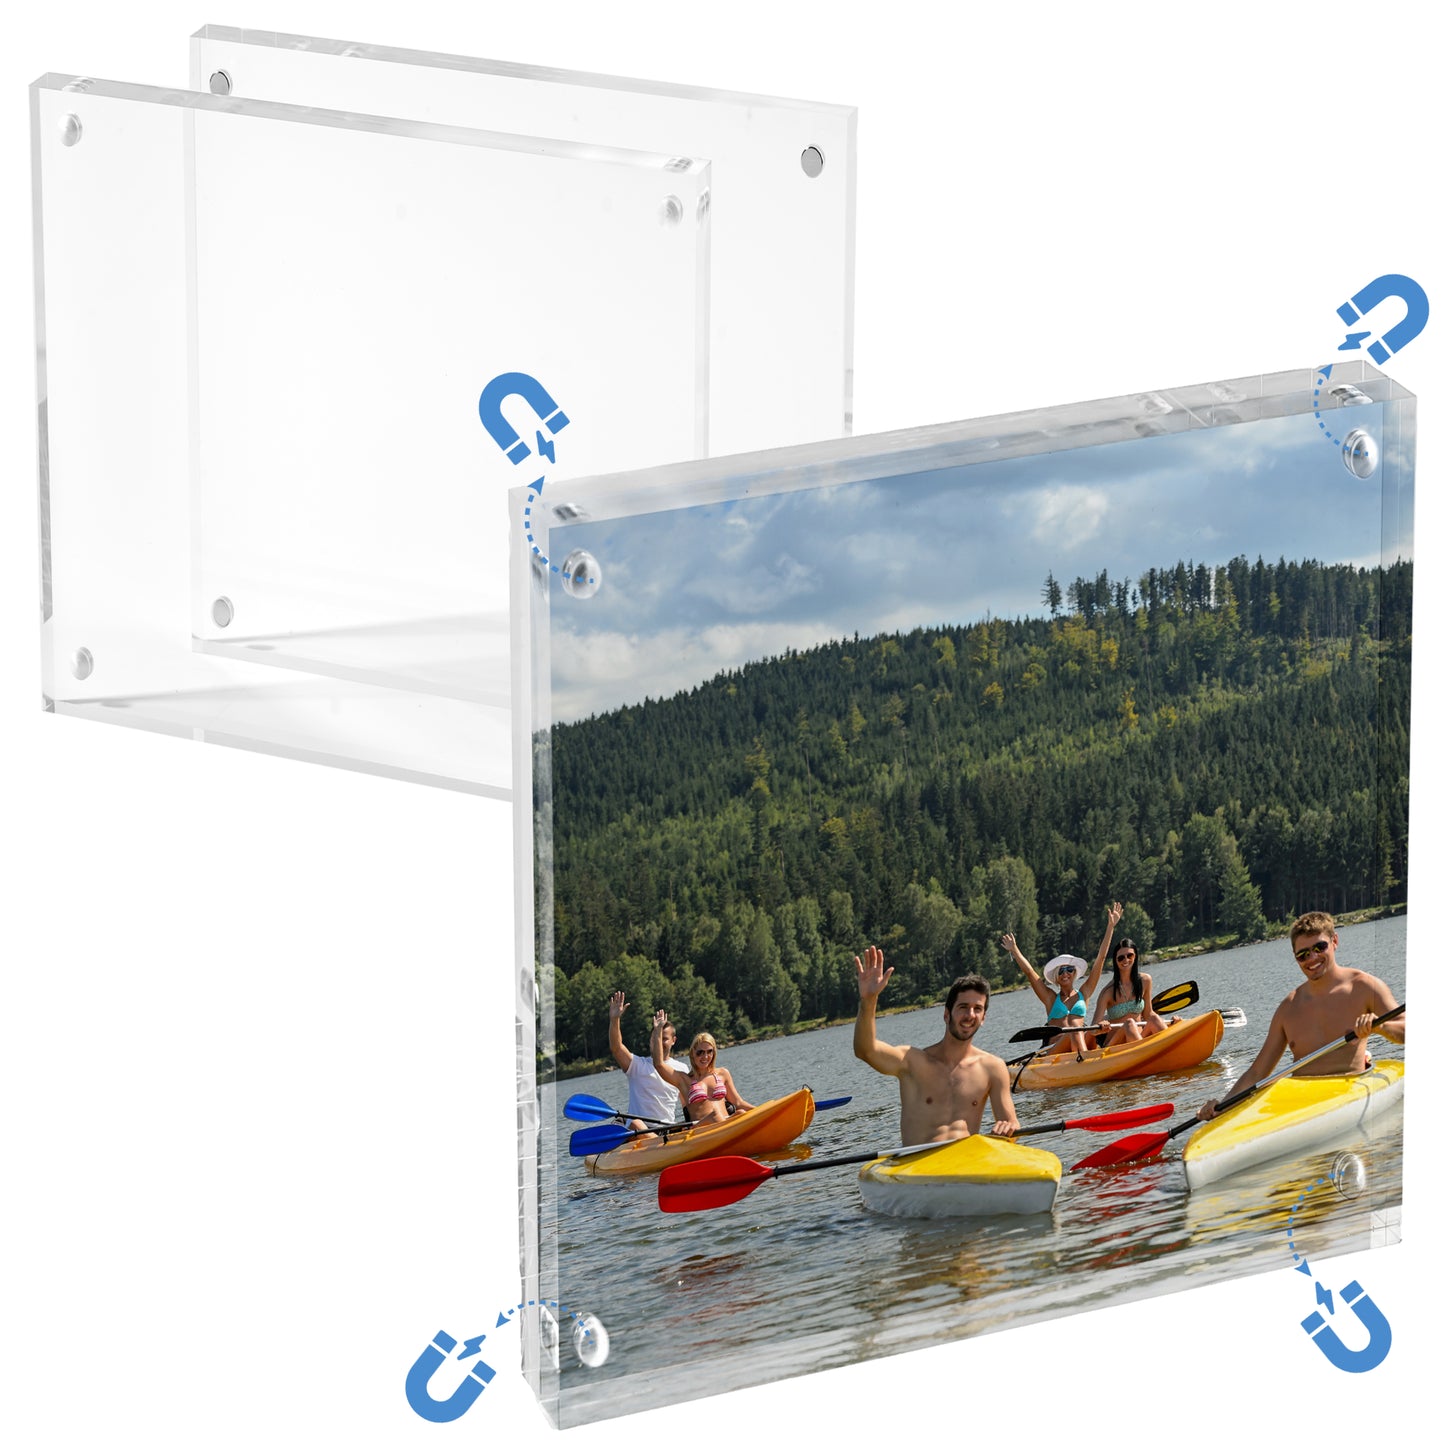 4"x4" Double-Sided Acrylic Magnetic Picture Frame